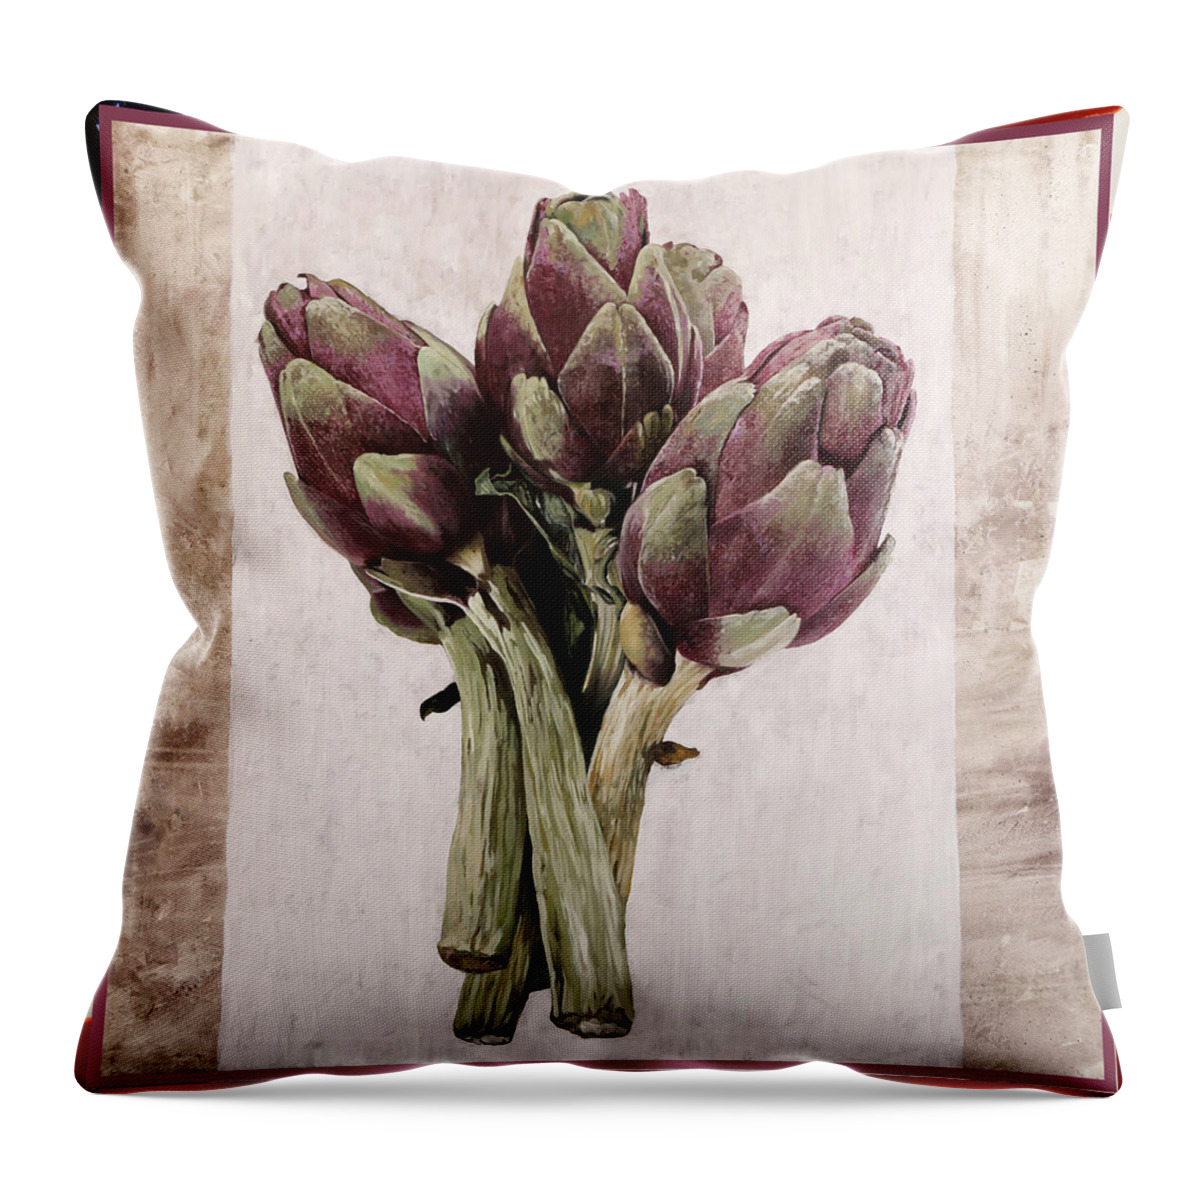 Artichoke Throw Pillow featuring the painting Carciofoni by Guido Borelli